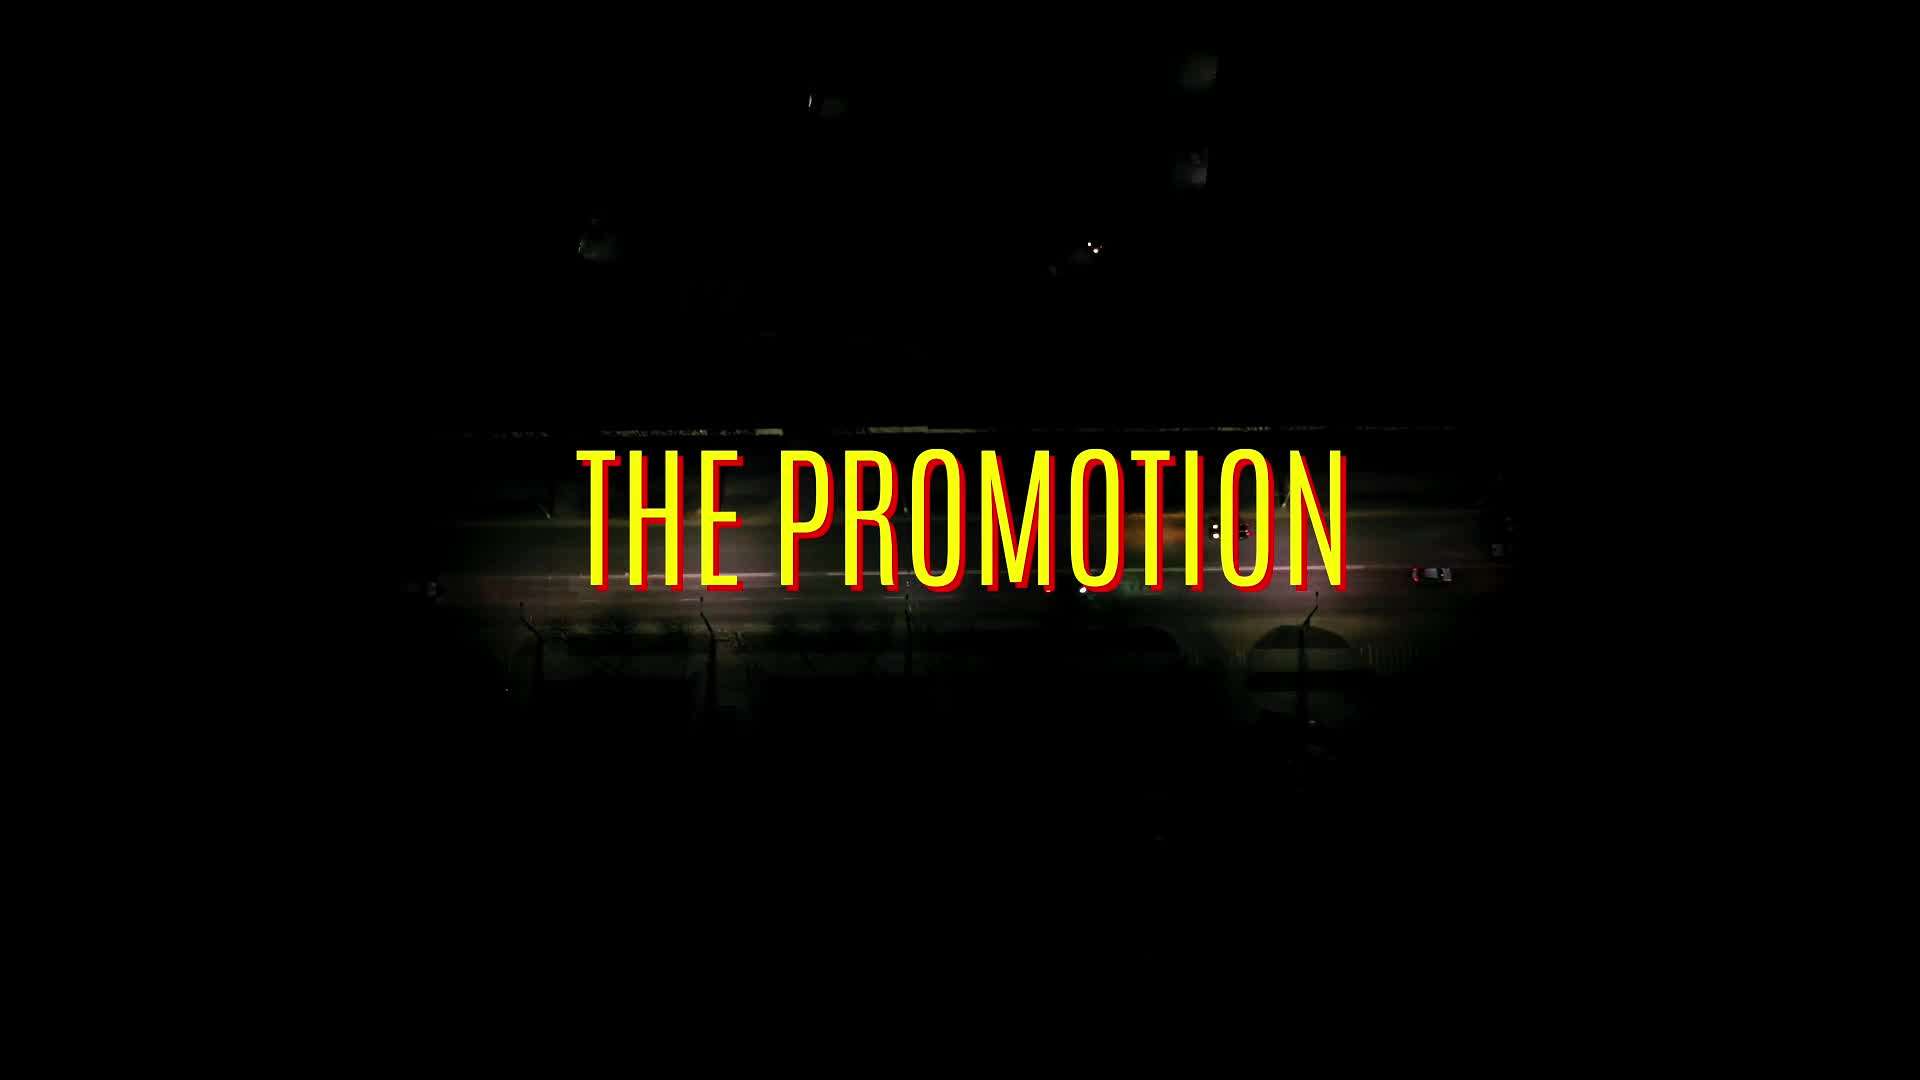 THE PROMOTION